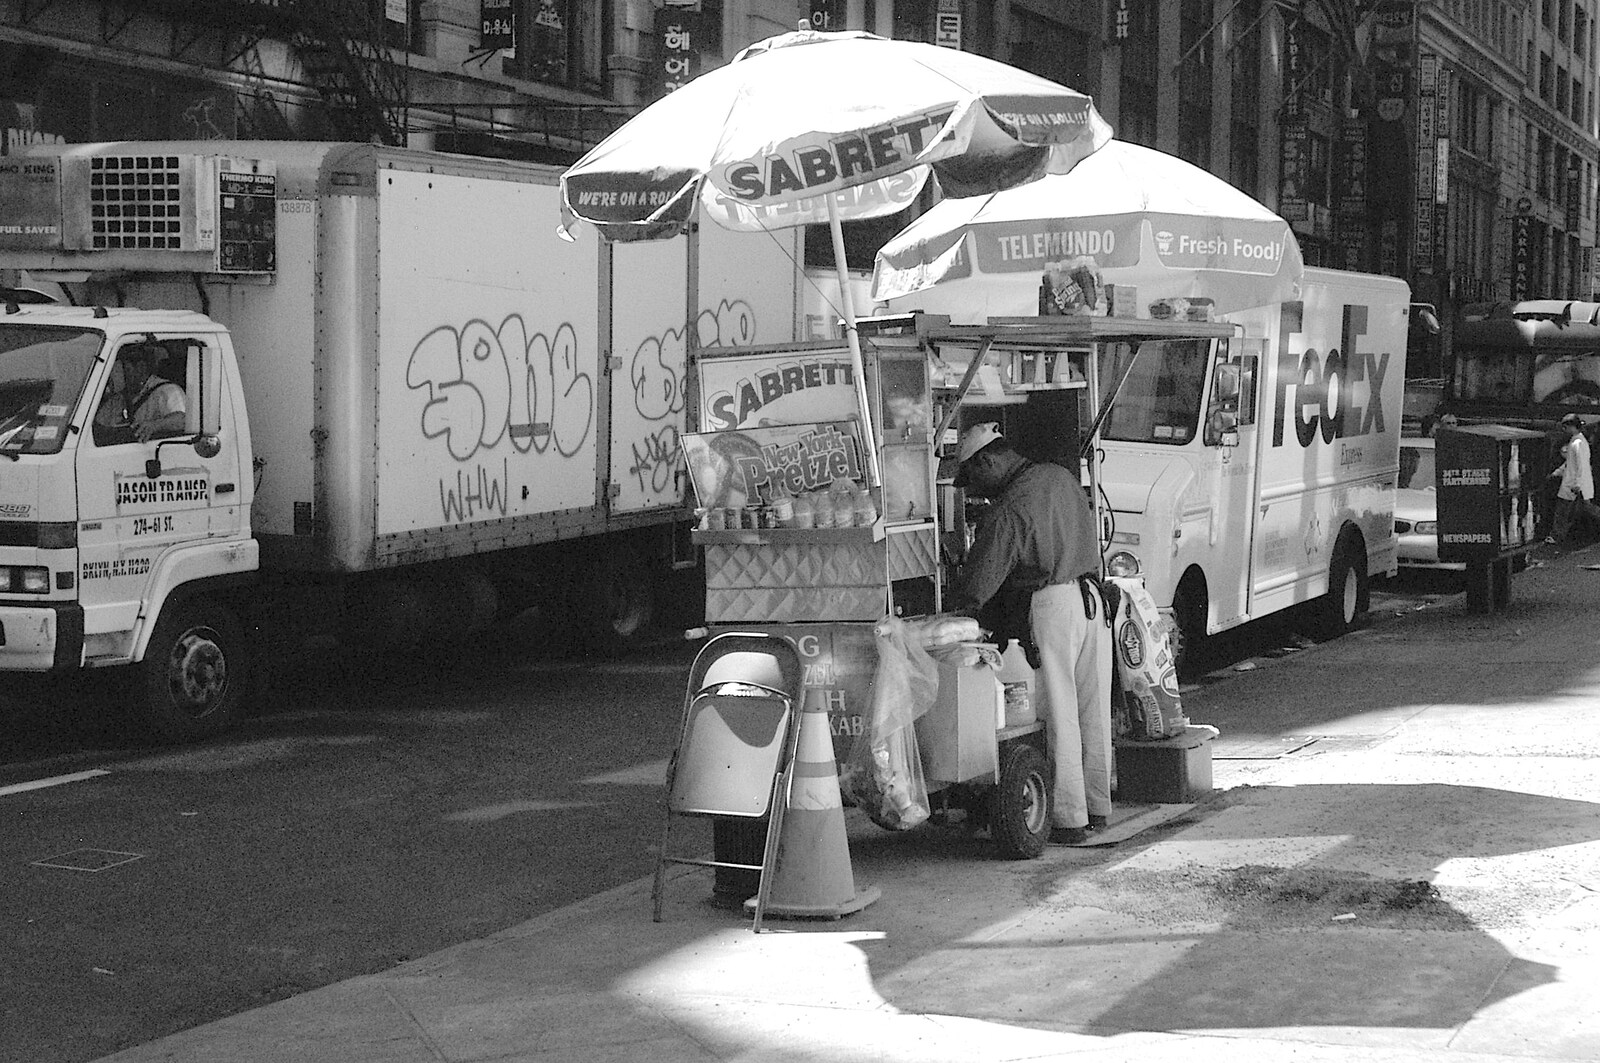 A Sabrett hotdog stand from Times Square, the Empire State and Ground Zero, New York, US - 1st May 2006